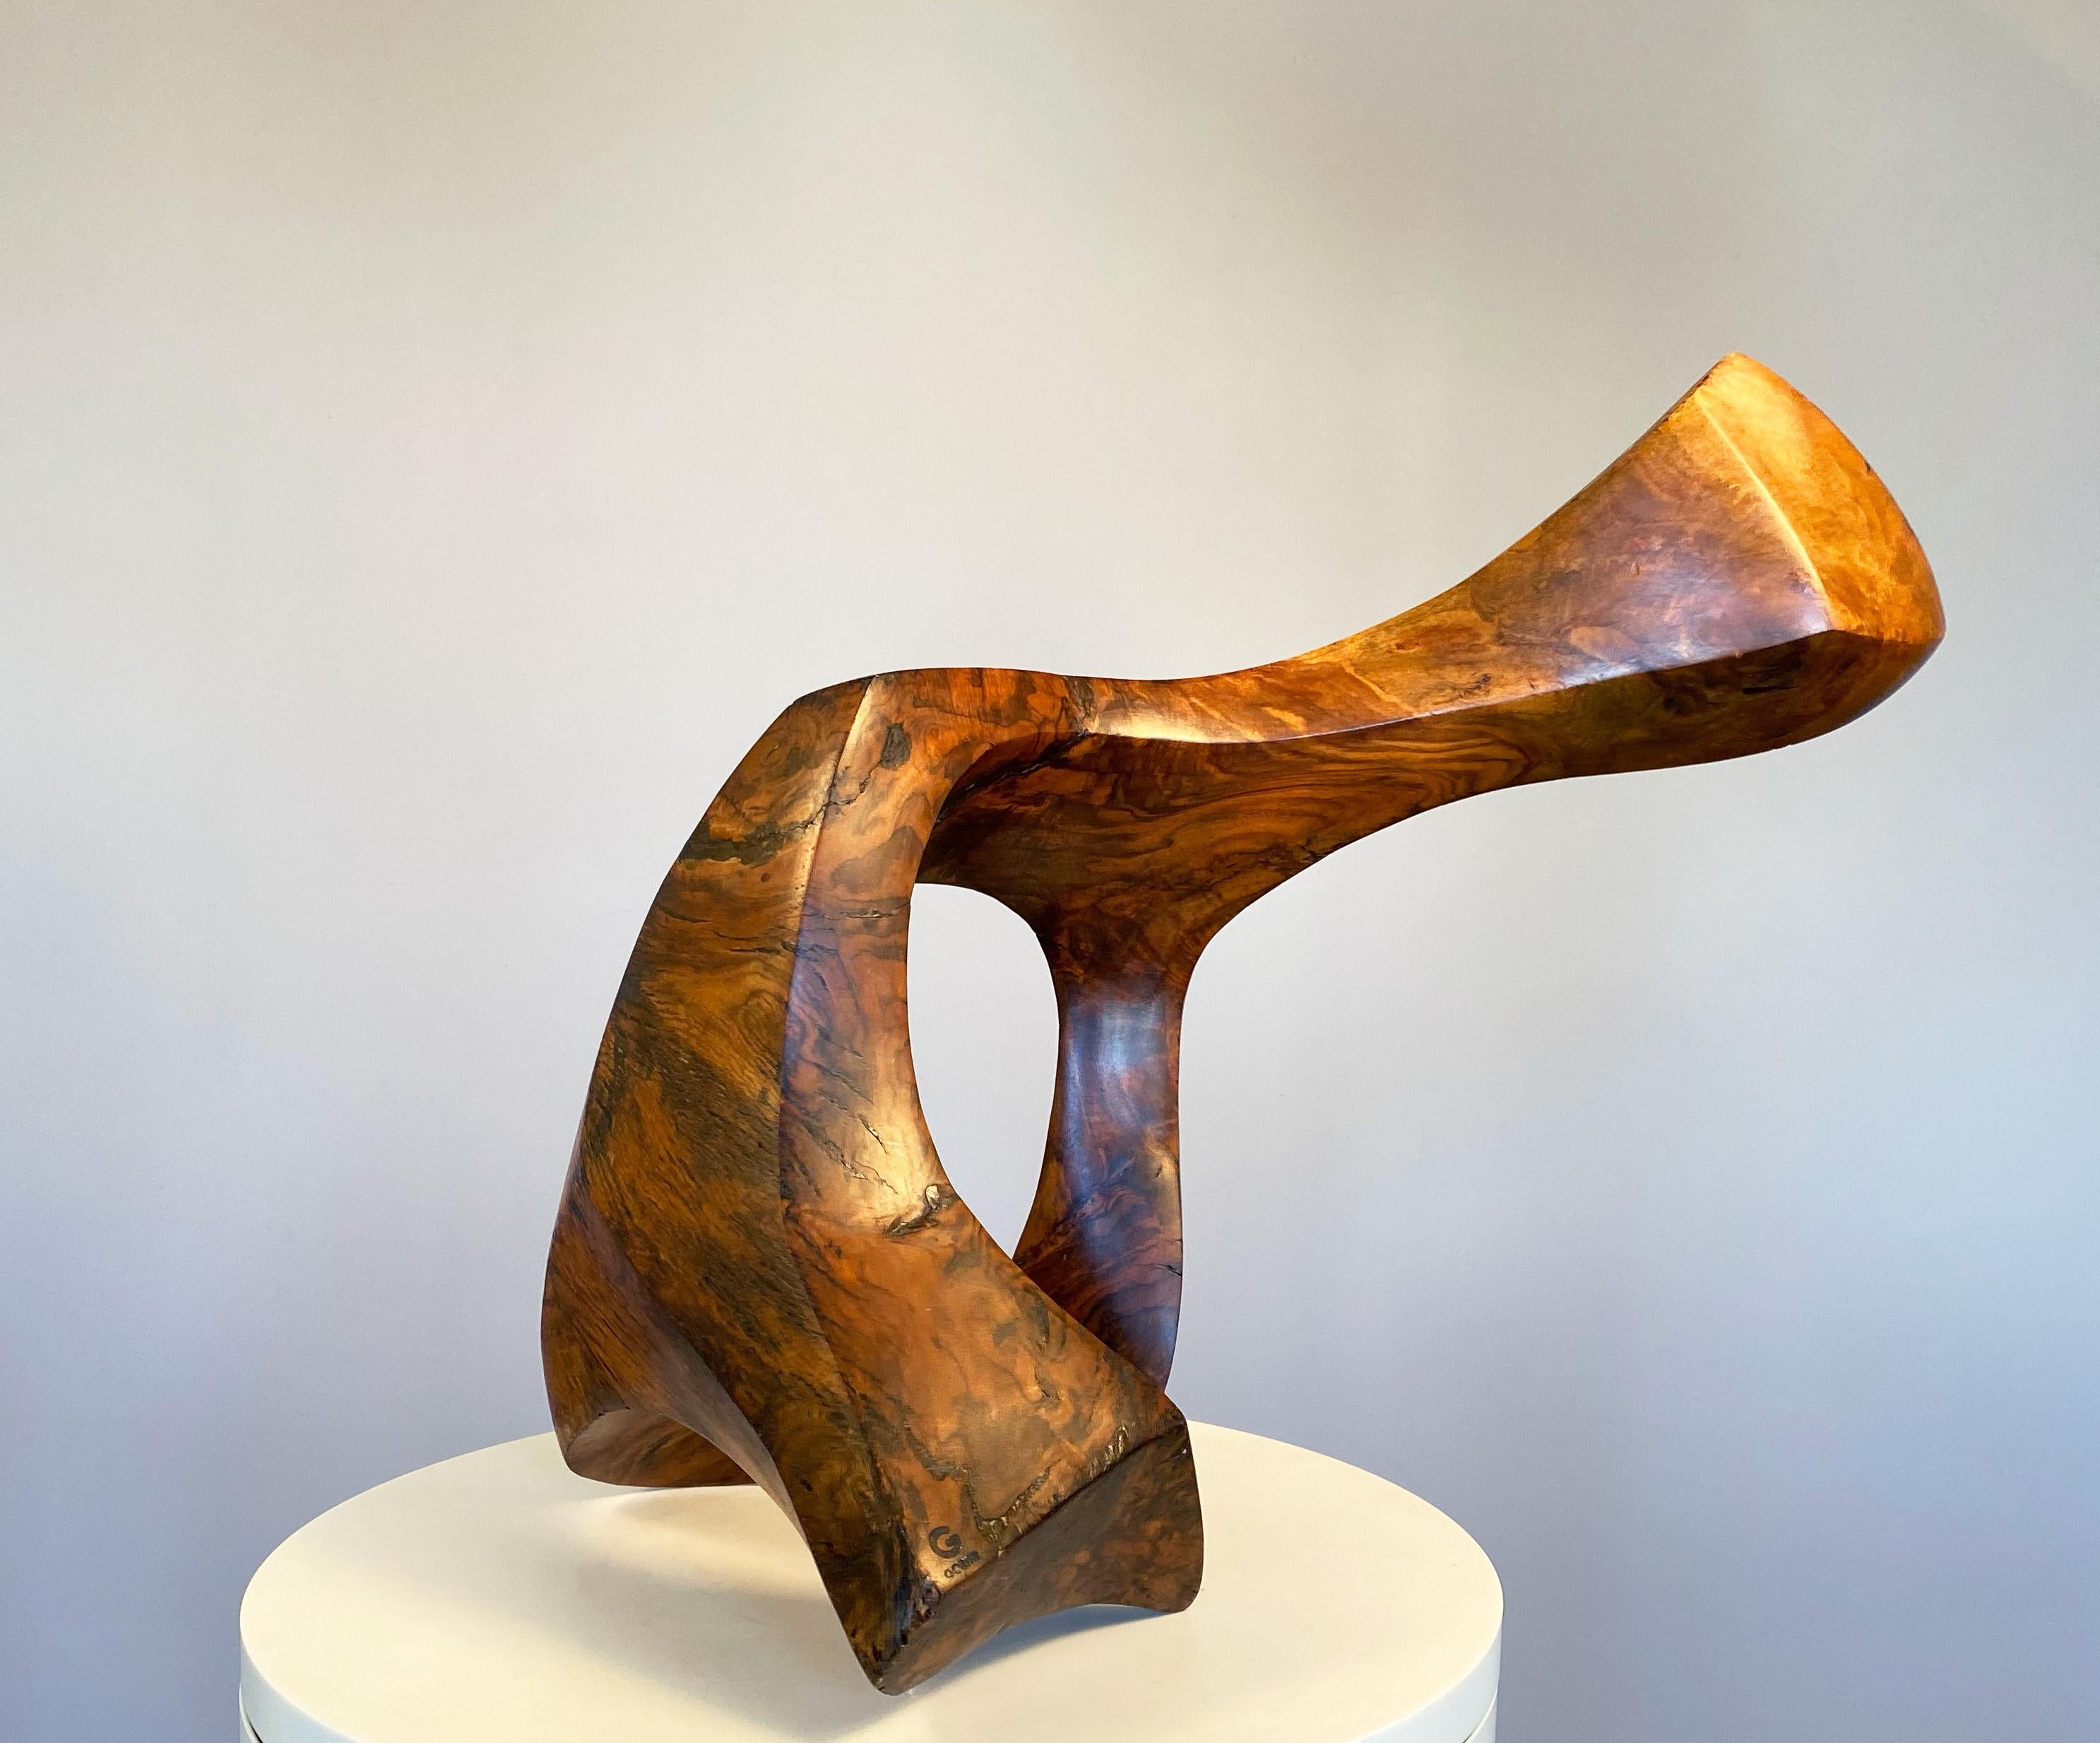 Joseph Goethe was one of America's modernist sculptors who explored carving in wood.  He had a passion for exotic woods and fashioned his subjects according to how the piece of wood inspired him.  This piece is fairly large scale and can sit on a